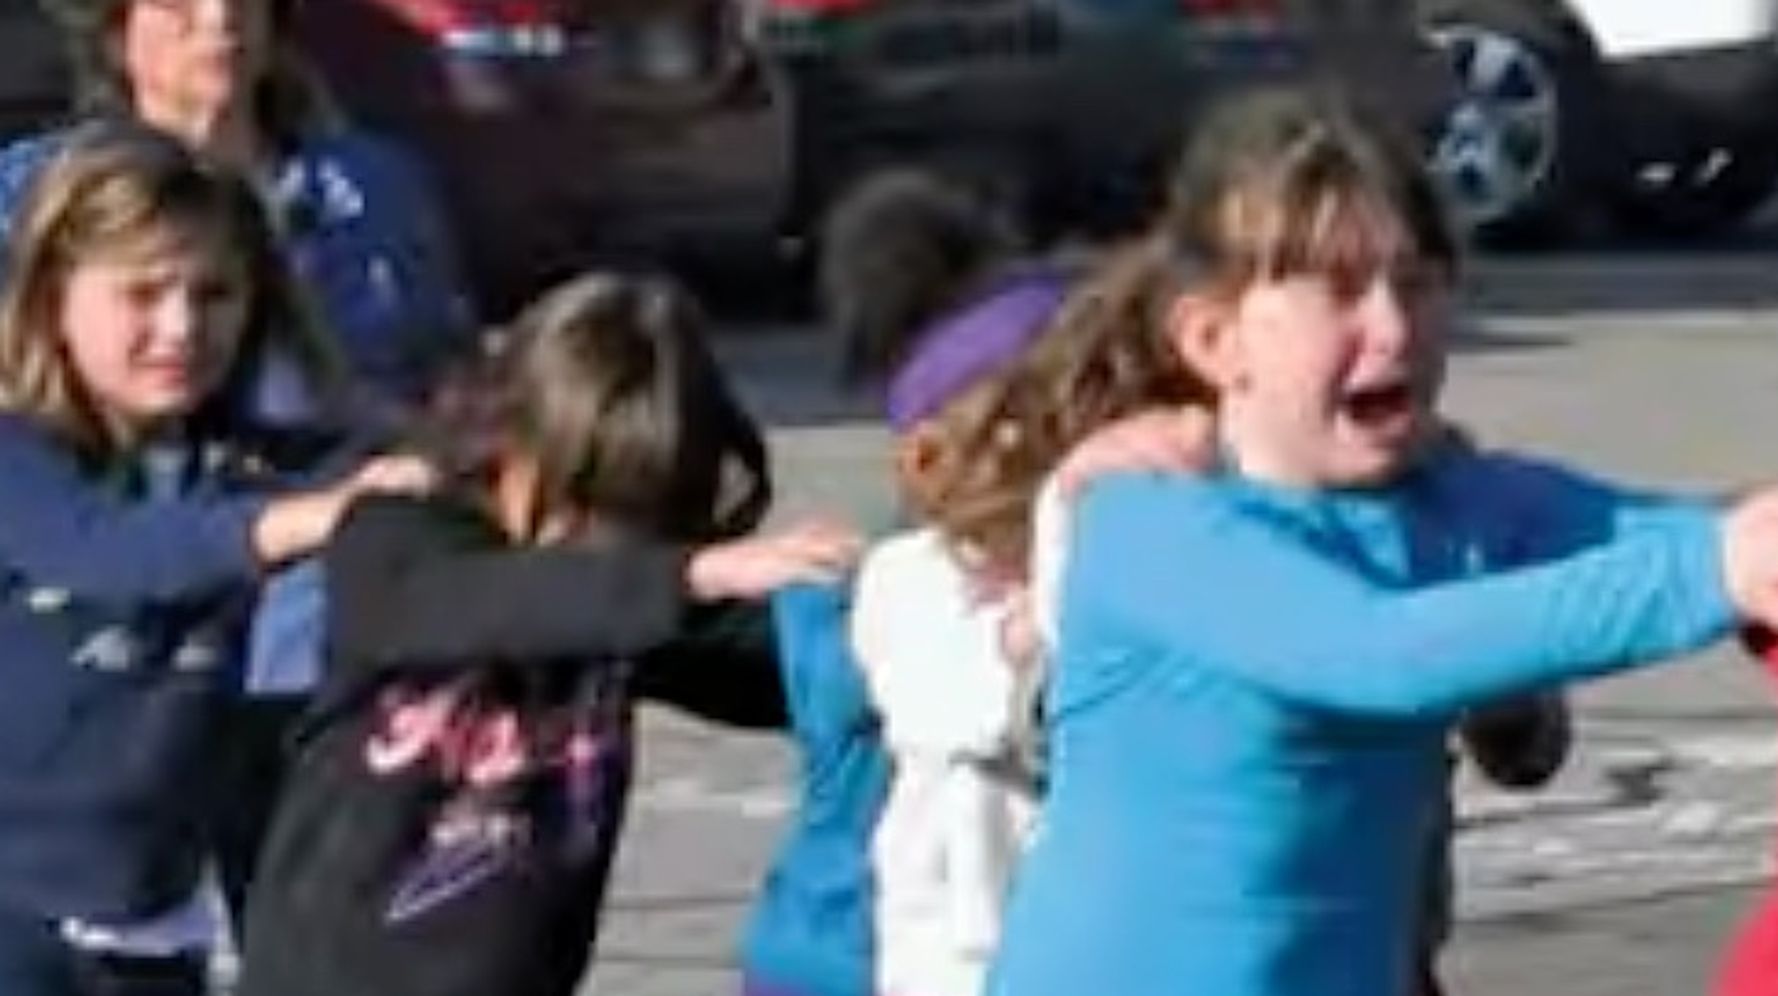 This Video Will Change You: Urgent Plea For Gun Sanity Has People In Tears